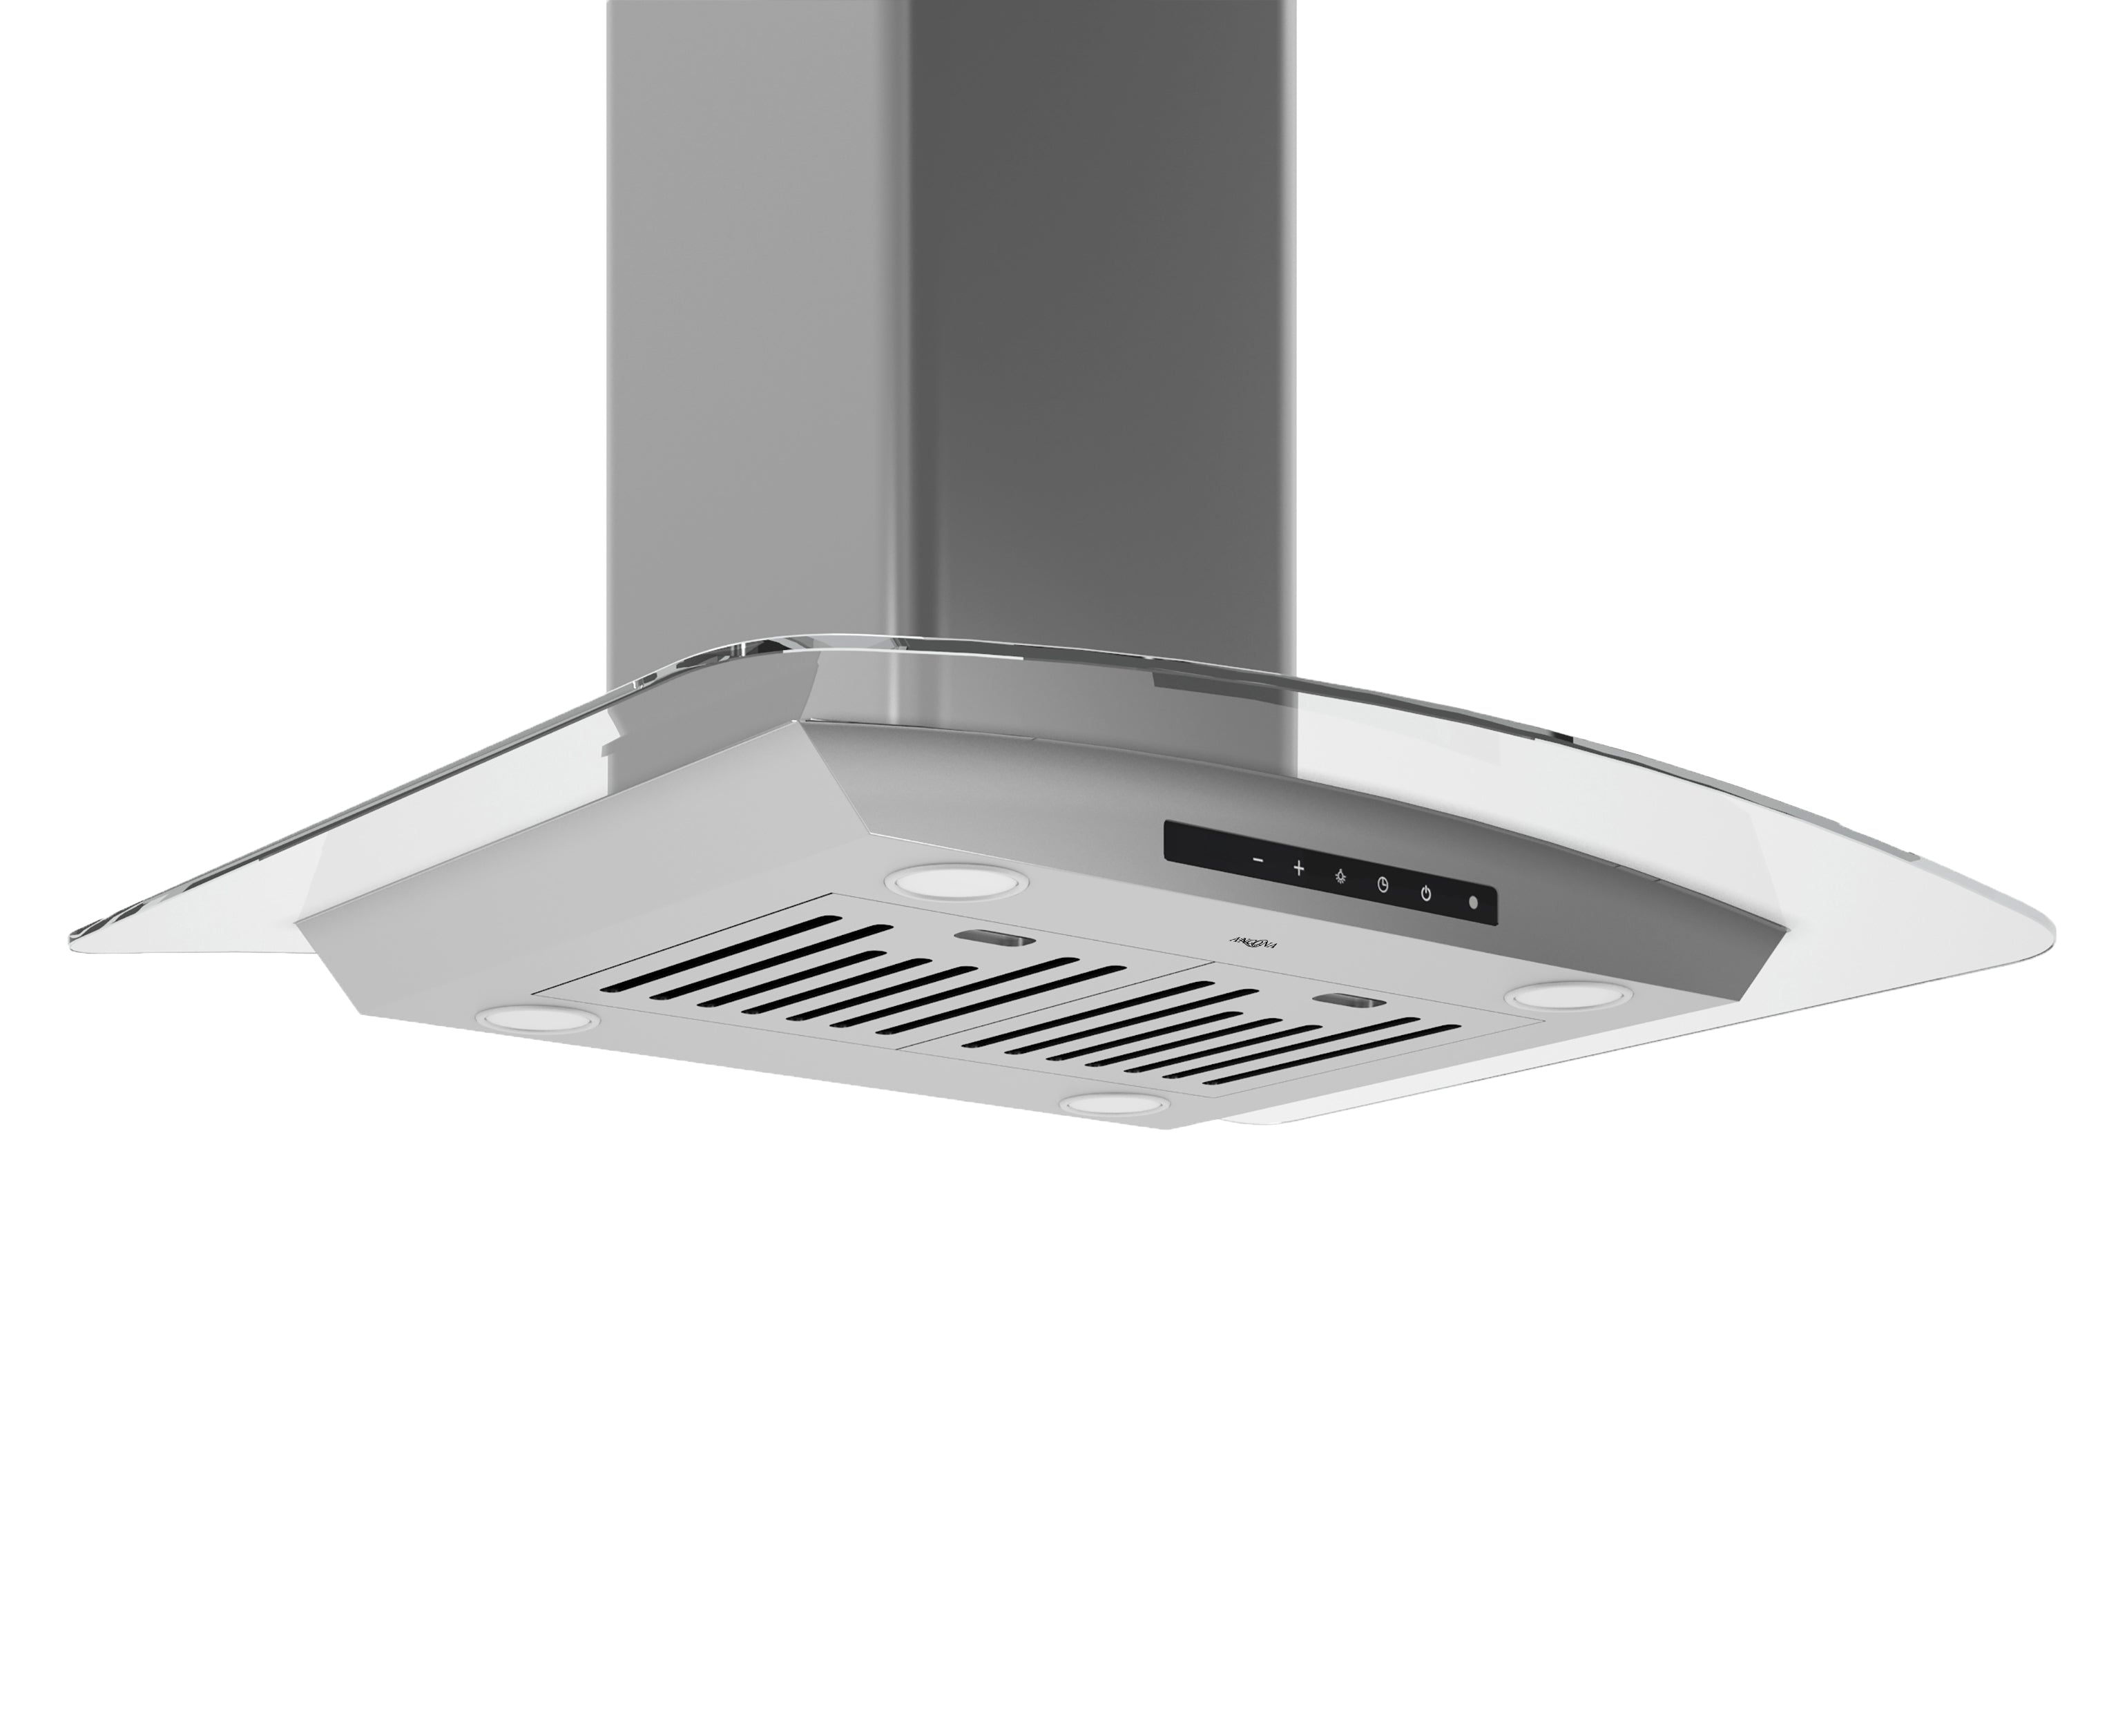 Noturna IG 30 in. Island Glass Range Hood in Stainless Steel with Night Light Feature